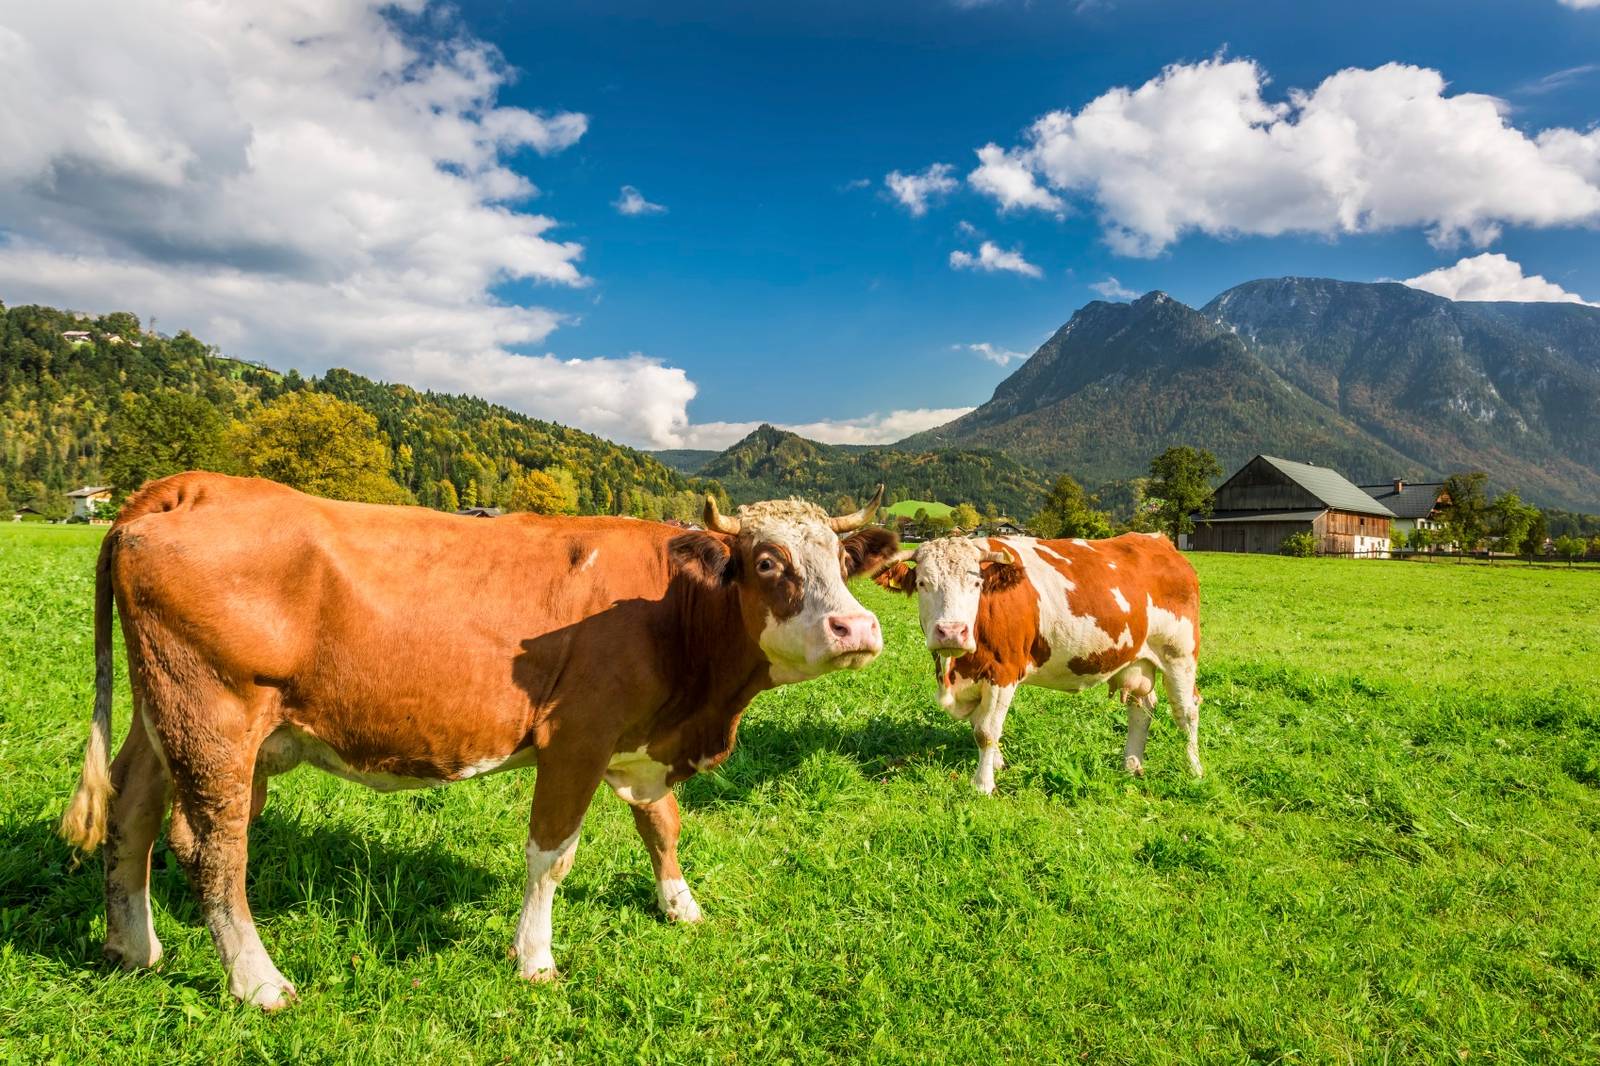 Cows on pasture in the Alps